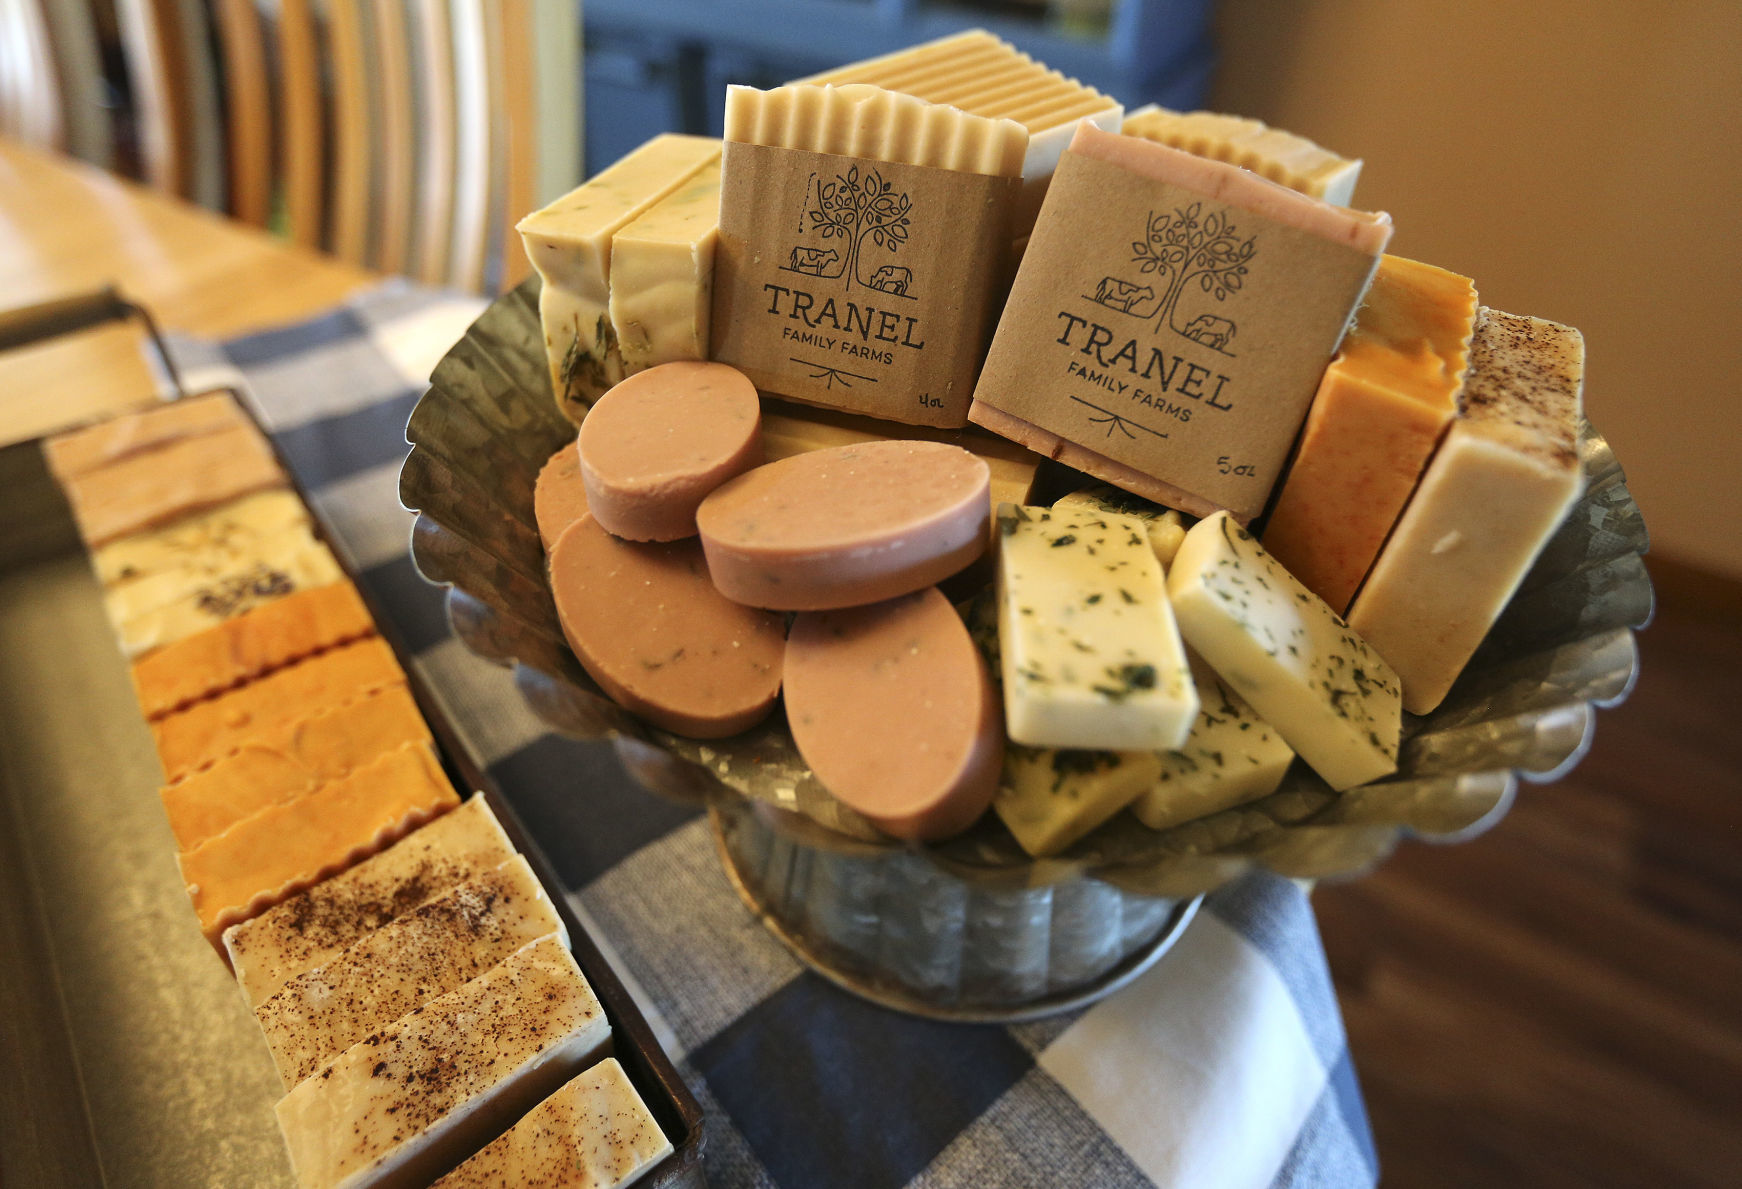 Tranel Family Farms Organic Soap in several varieties. PHOTO CREDIT: Dave Kettering